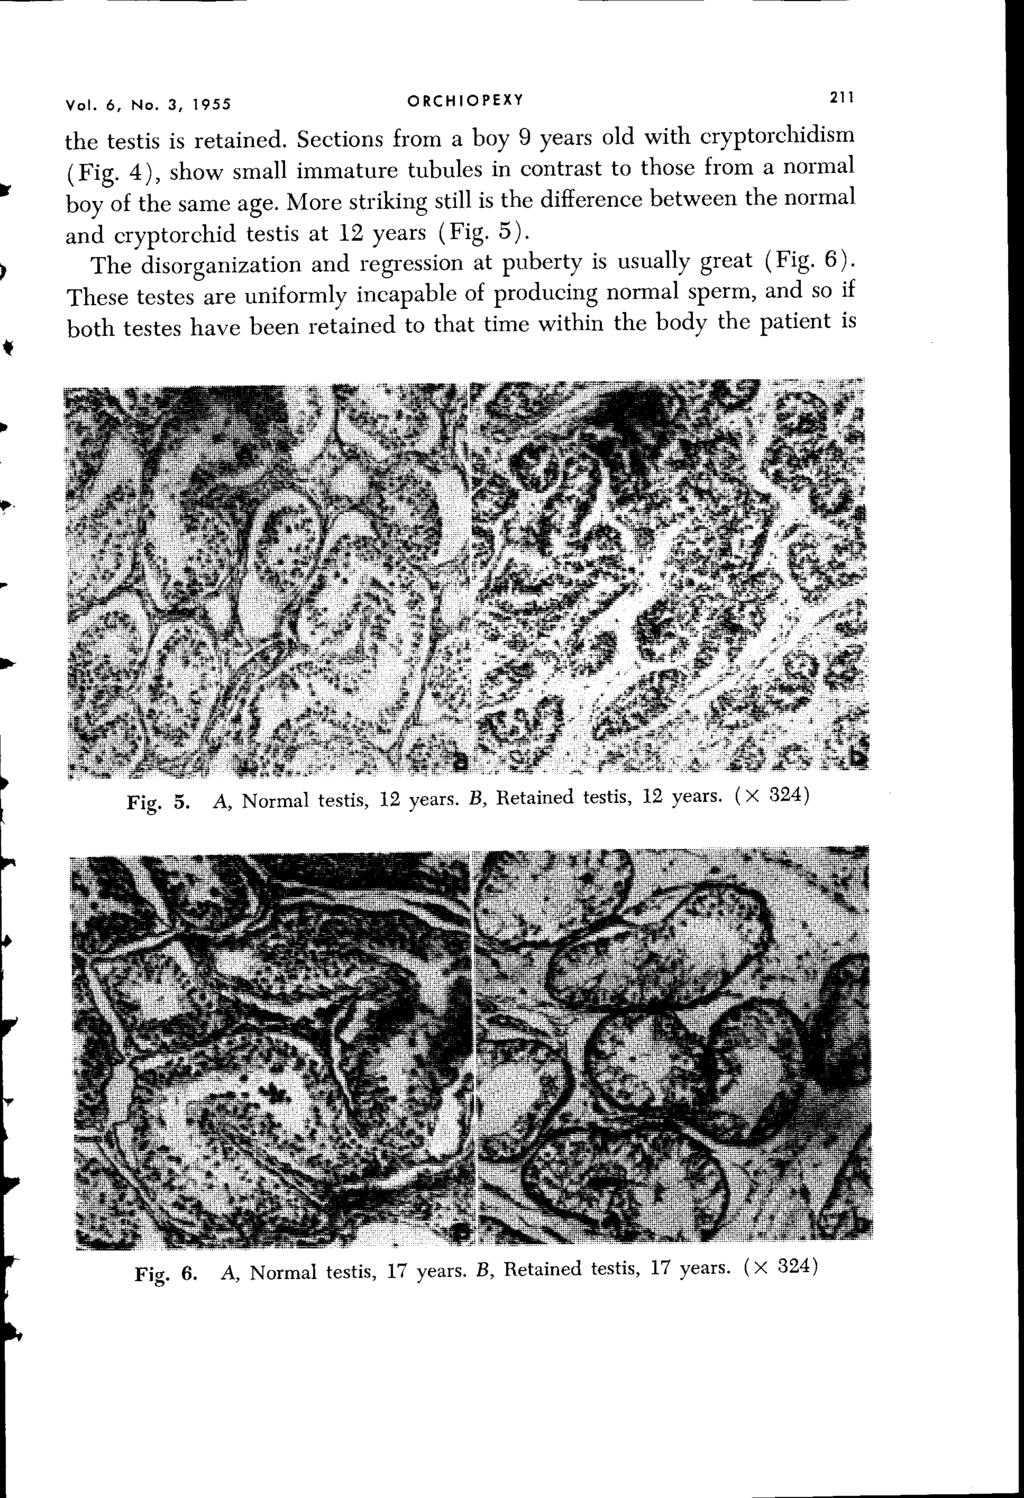 Vol. 6, No.3, 1955 ORCHIOPEXY 211 the testis is retained.